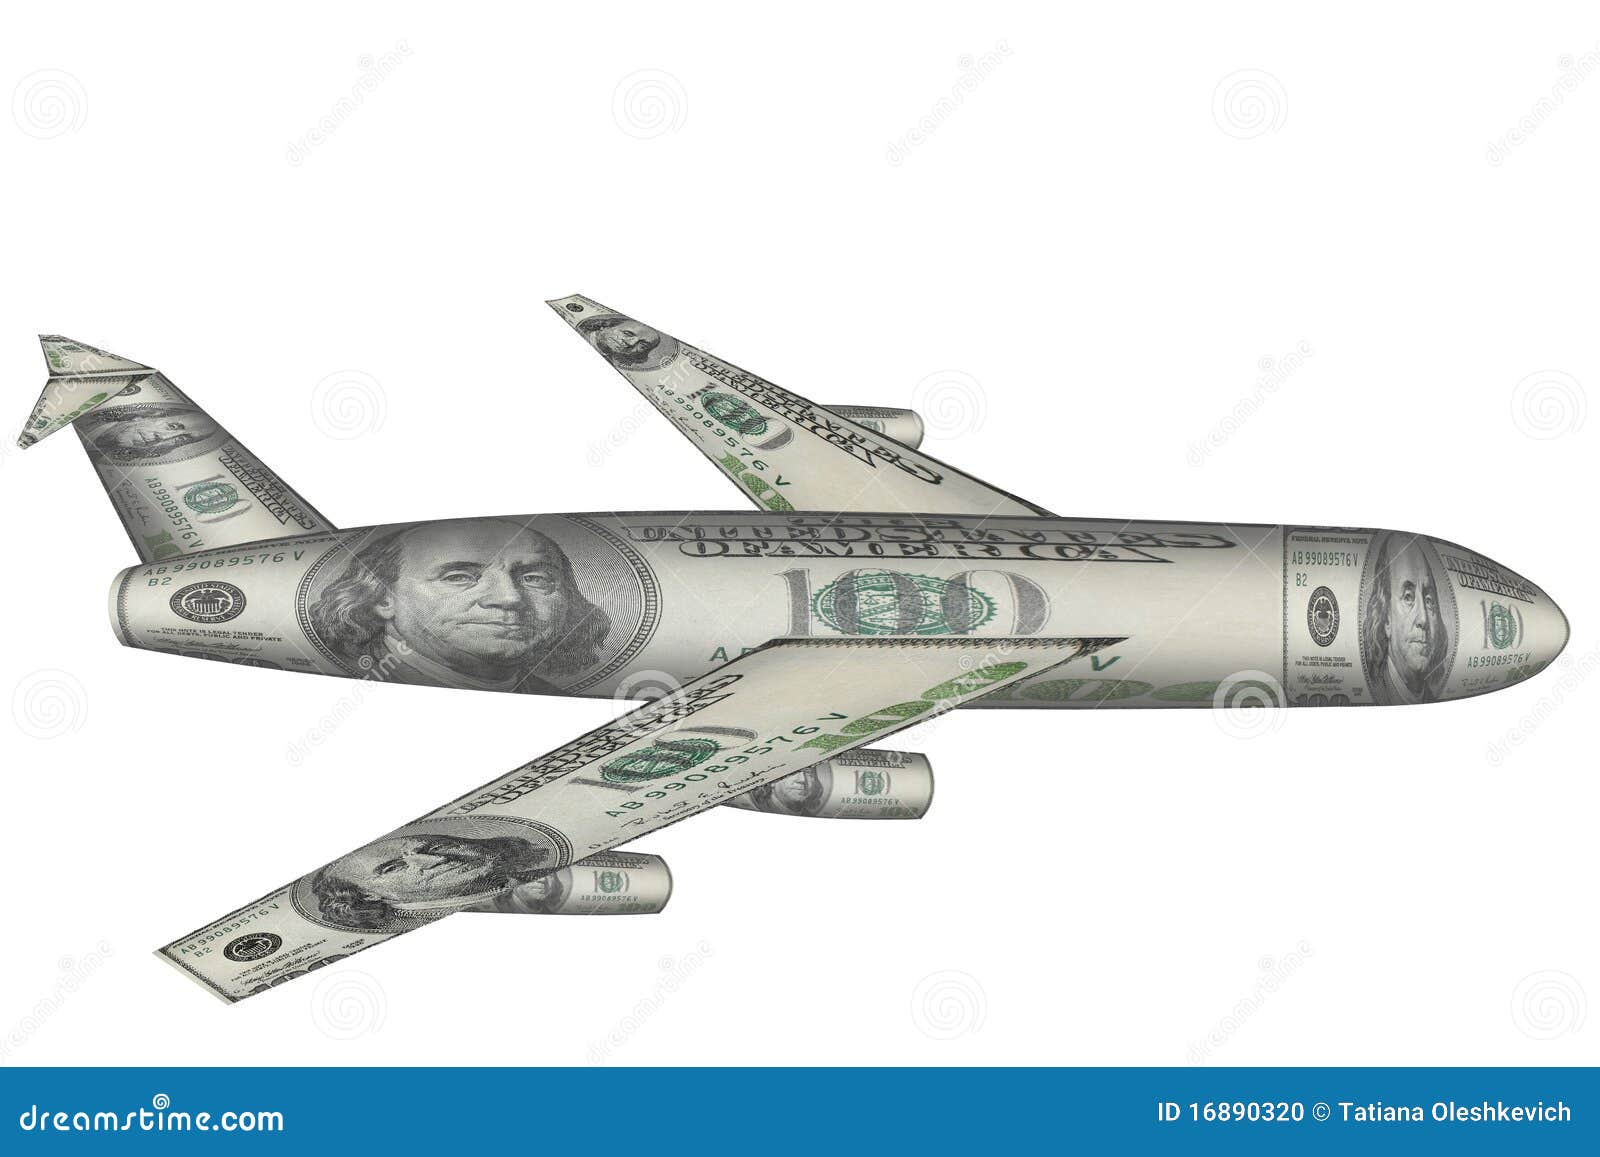 Airplane Made From Dollars Flying Over White Stock Photo Image 16890320